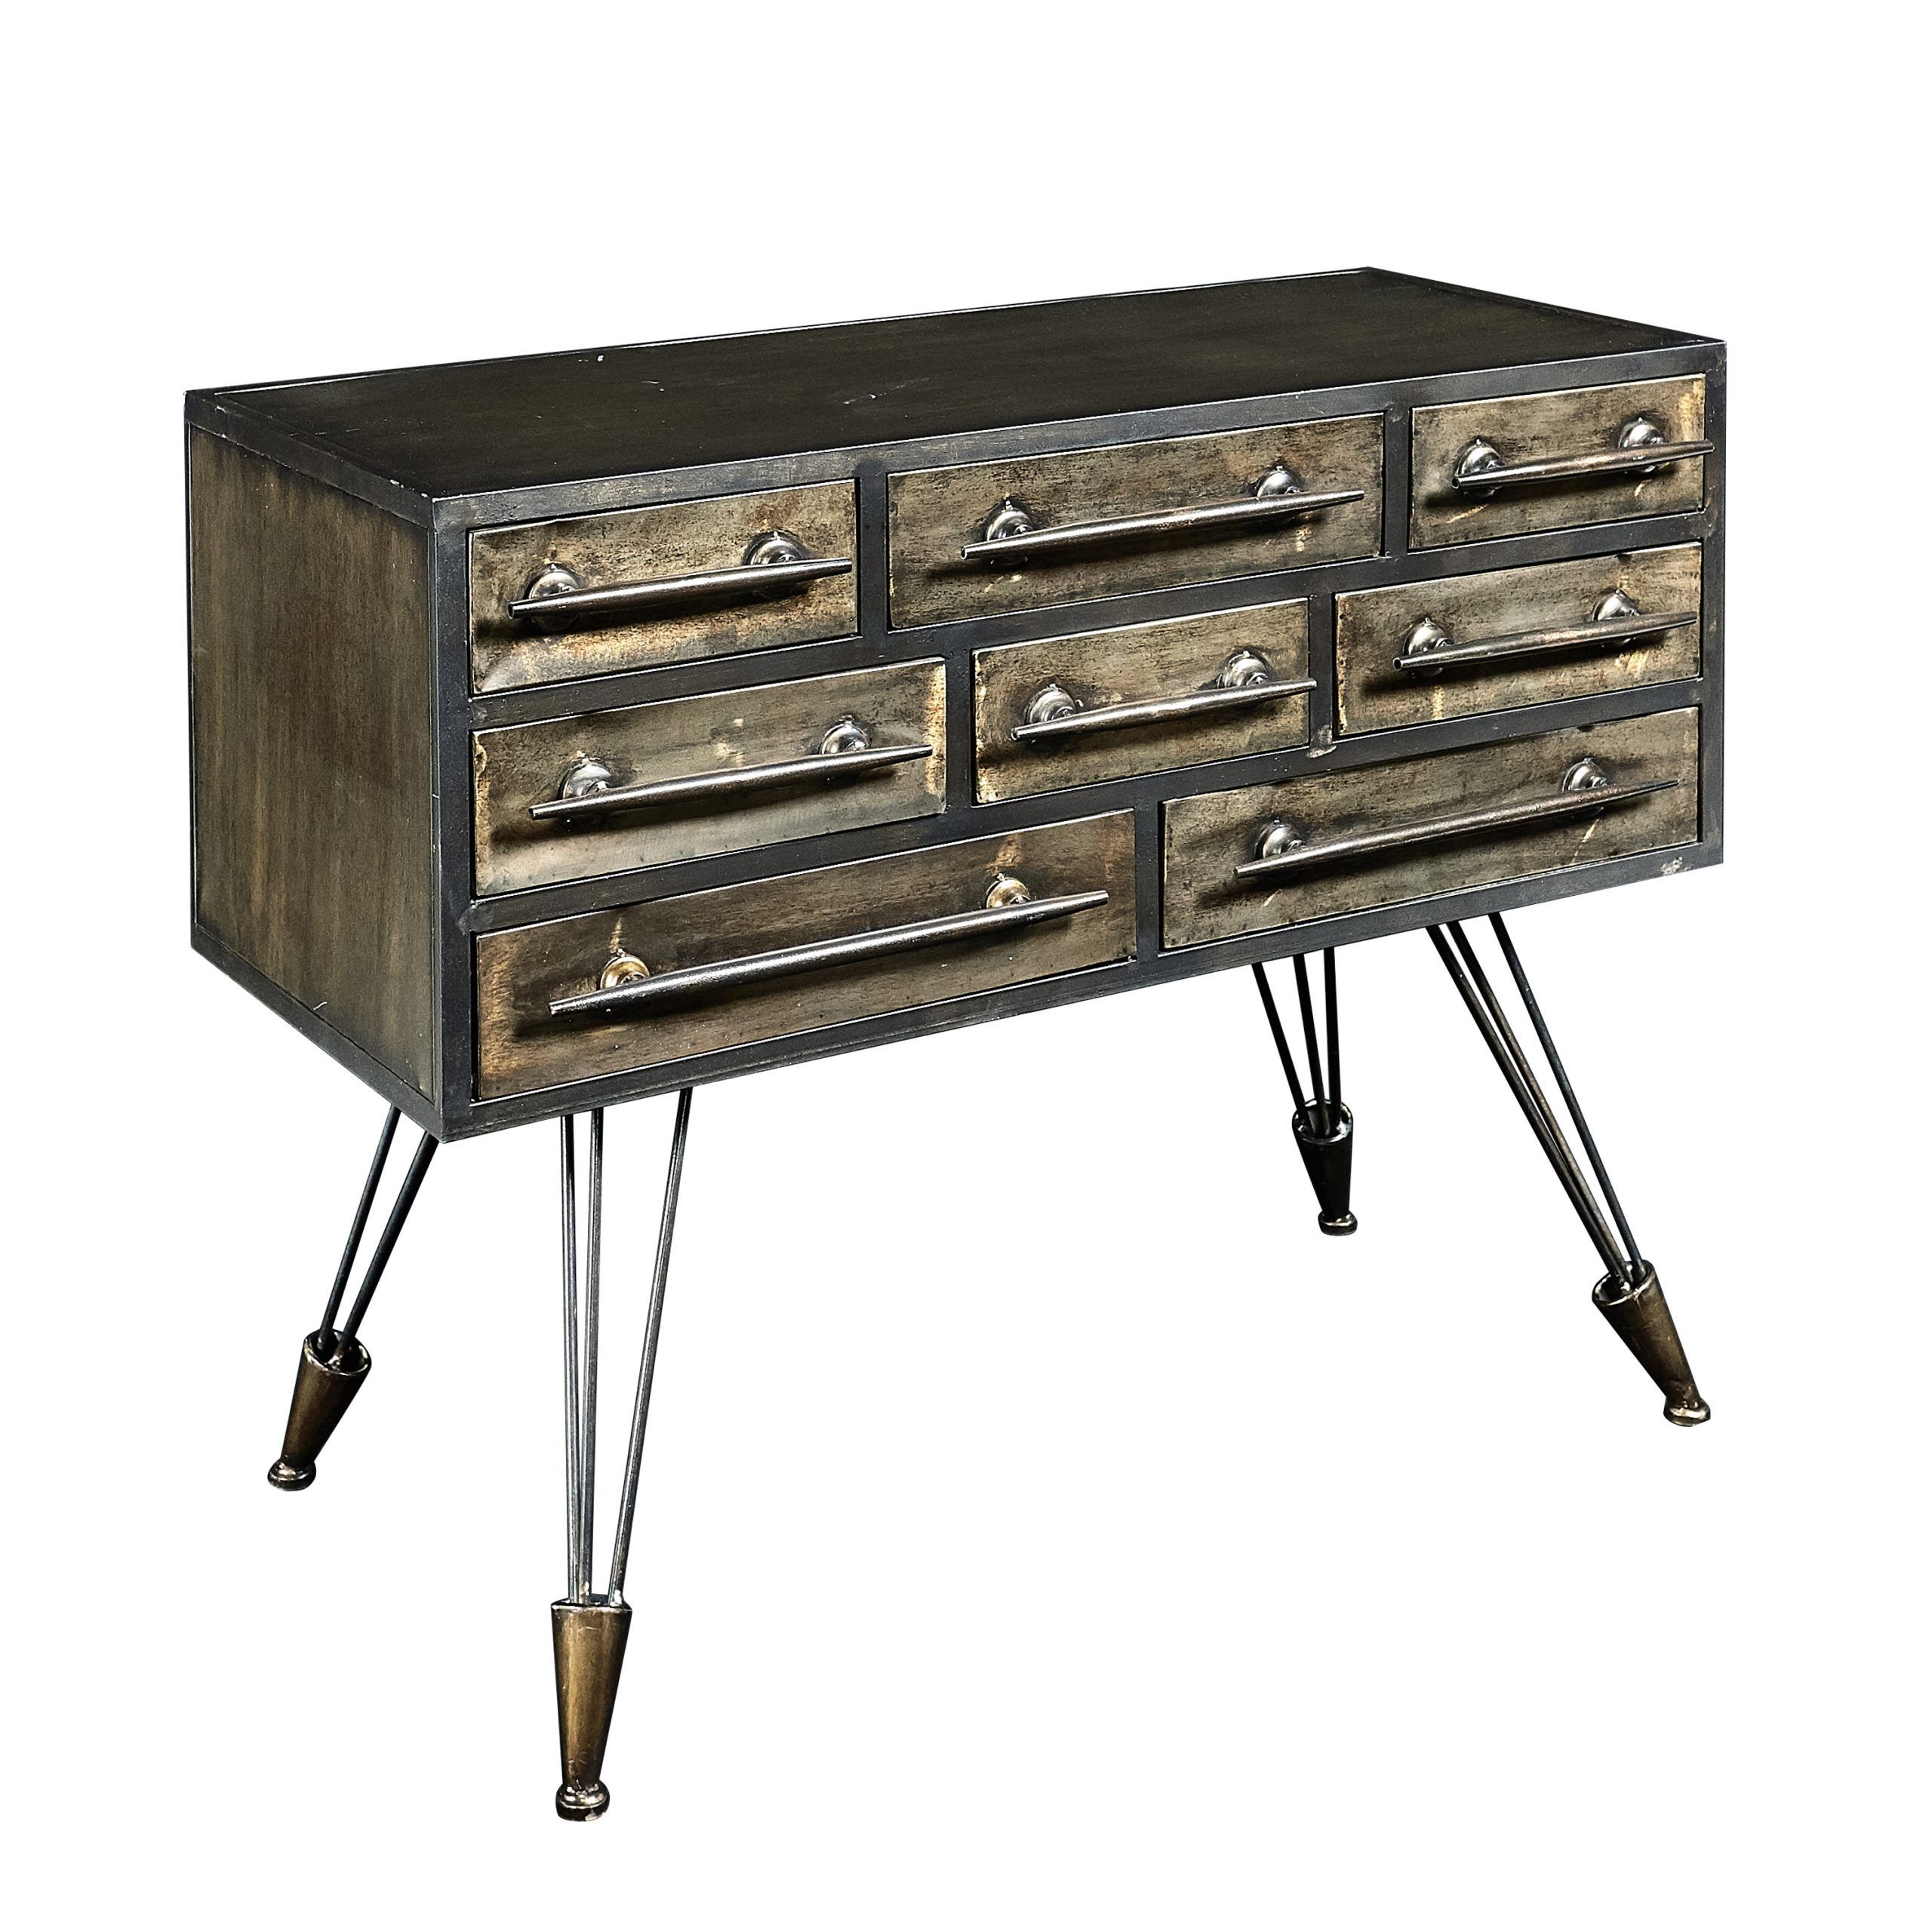 8 Drawers Metal Console Table With Hairpin Legs, Brass And With Metal Console Tables (View 7 of 20)